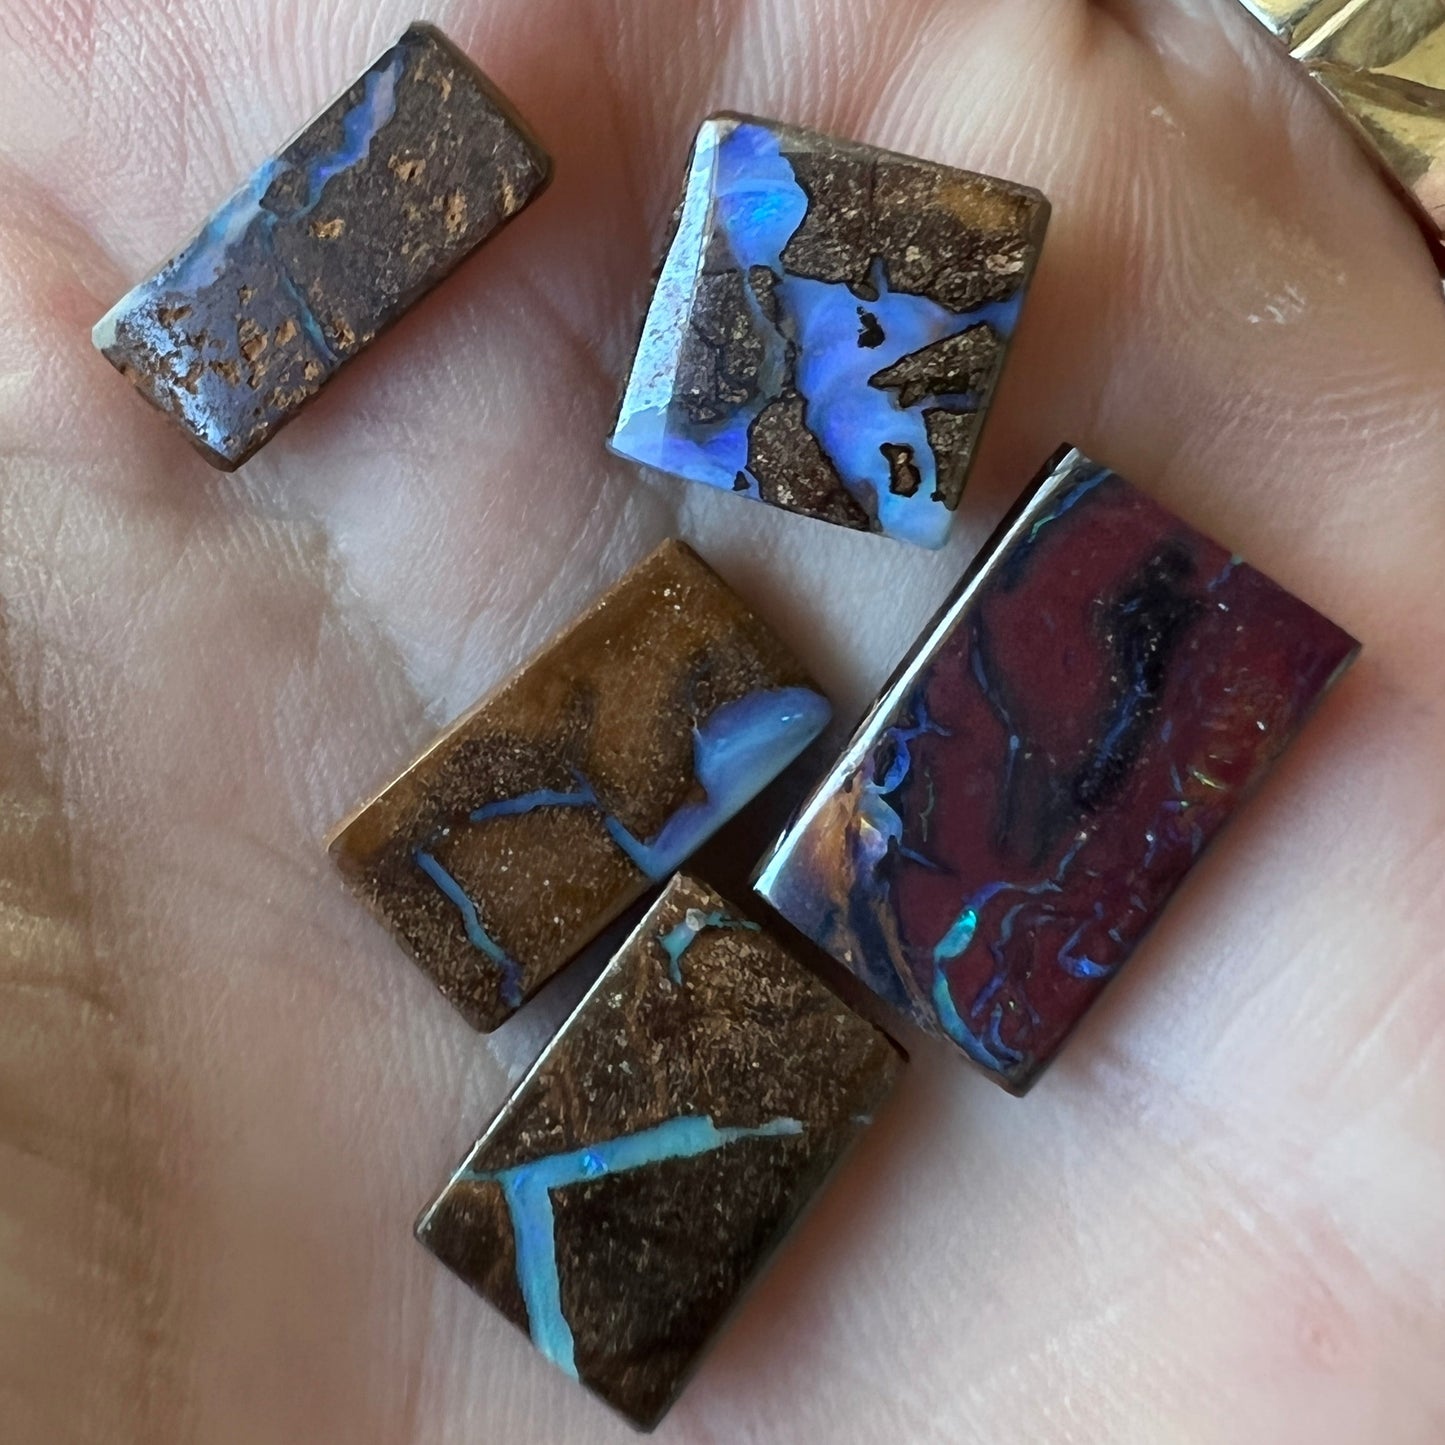 Five square cut boulder opals from Winton. Nice polish.